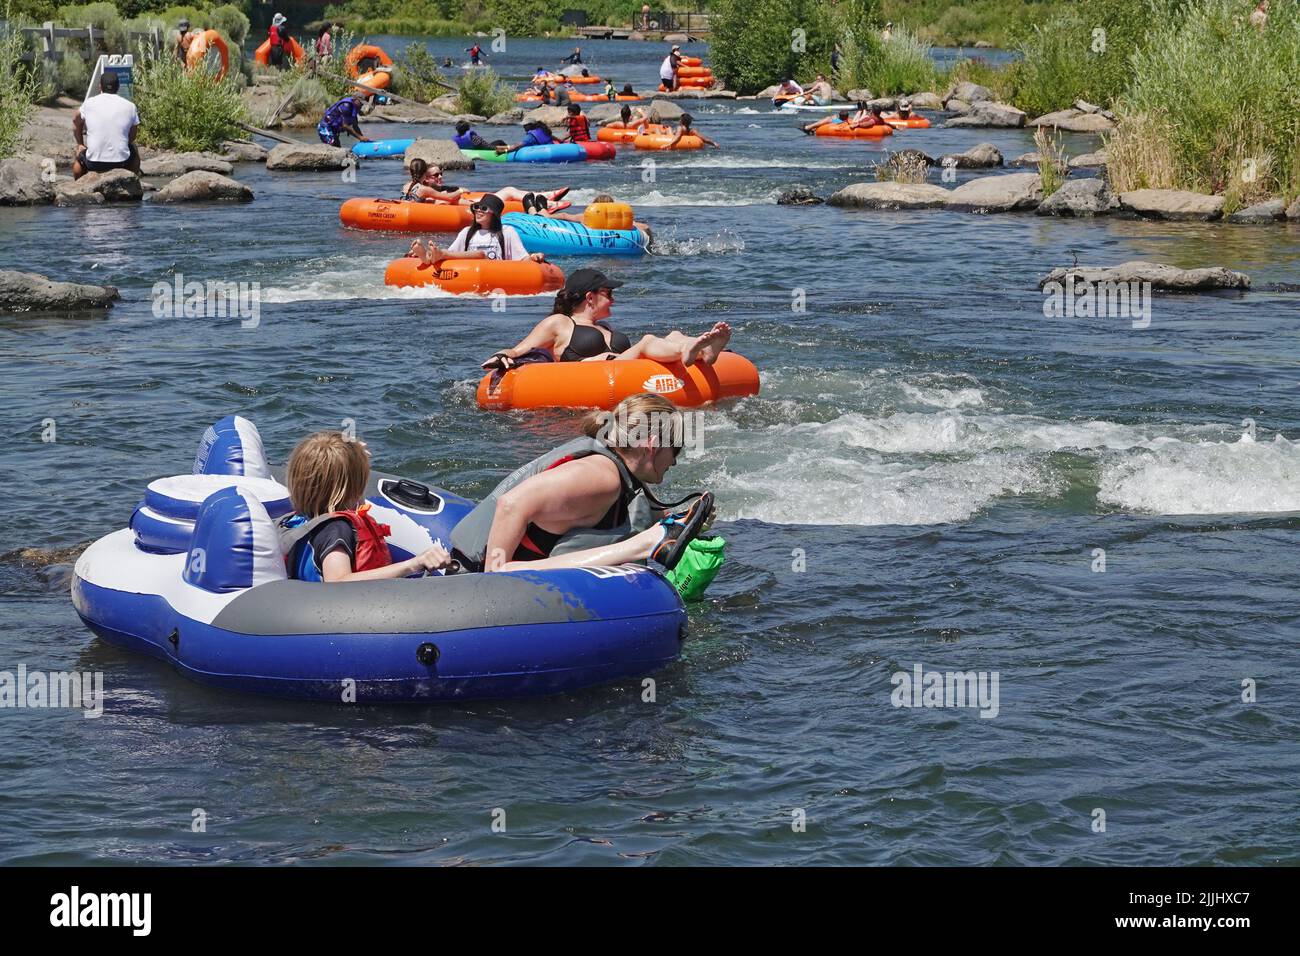 Beating the heat in the American Pacific Northwest. The state of Oregon and the Pacific Northwest in general is undergoing another major heatwave with temperatures reaching 100 degrees farenheit plus during the afternoons. Floating the river is a popular way to cool off. This is the Deschutes River in Bend, Oregon. Stock Photo